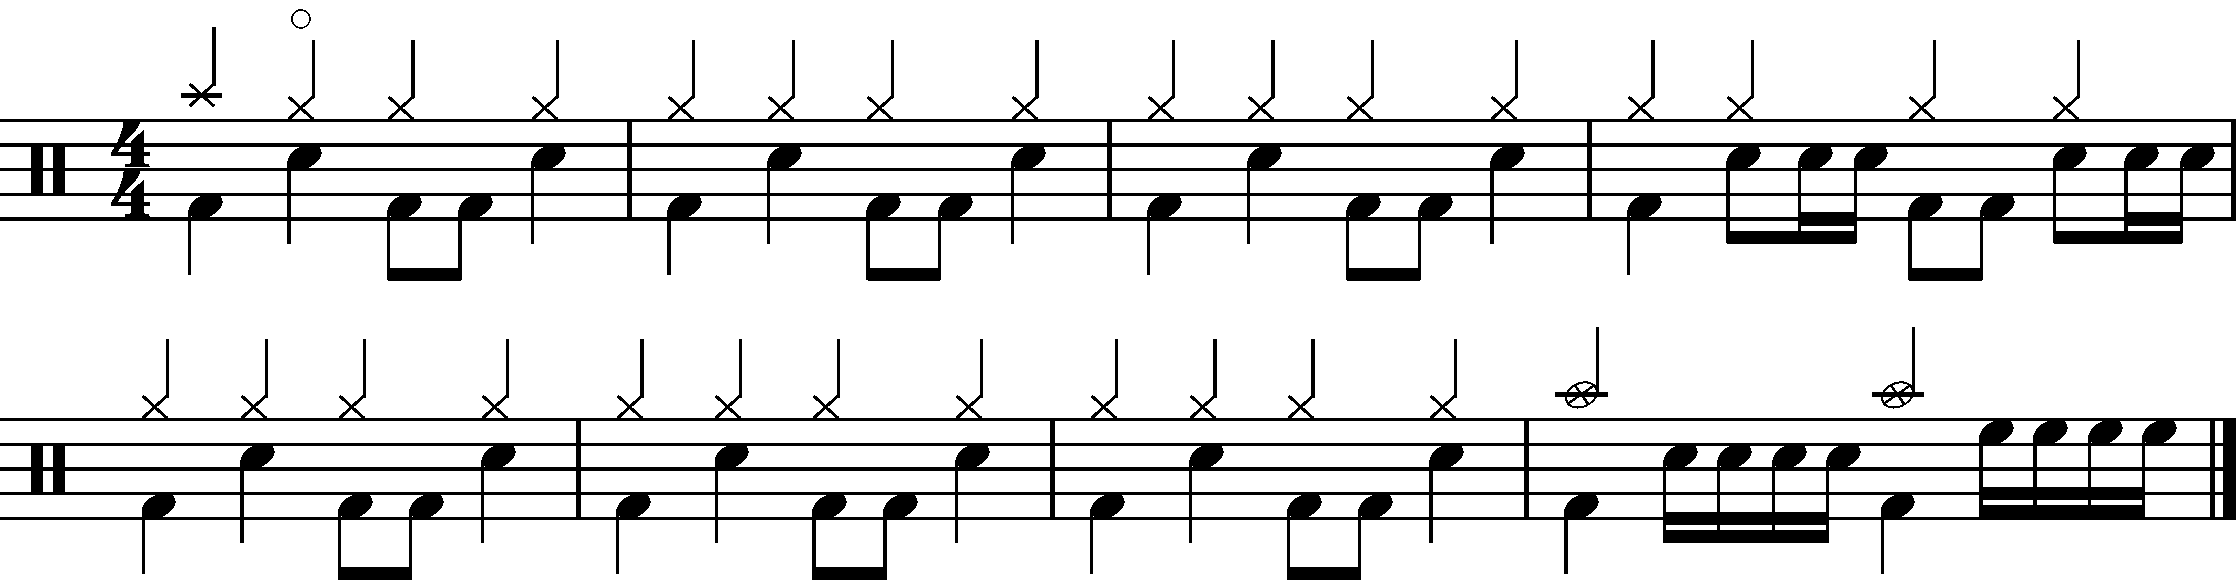 An eight bar phrase made up of A B and C sections.